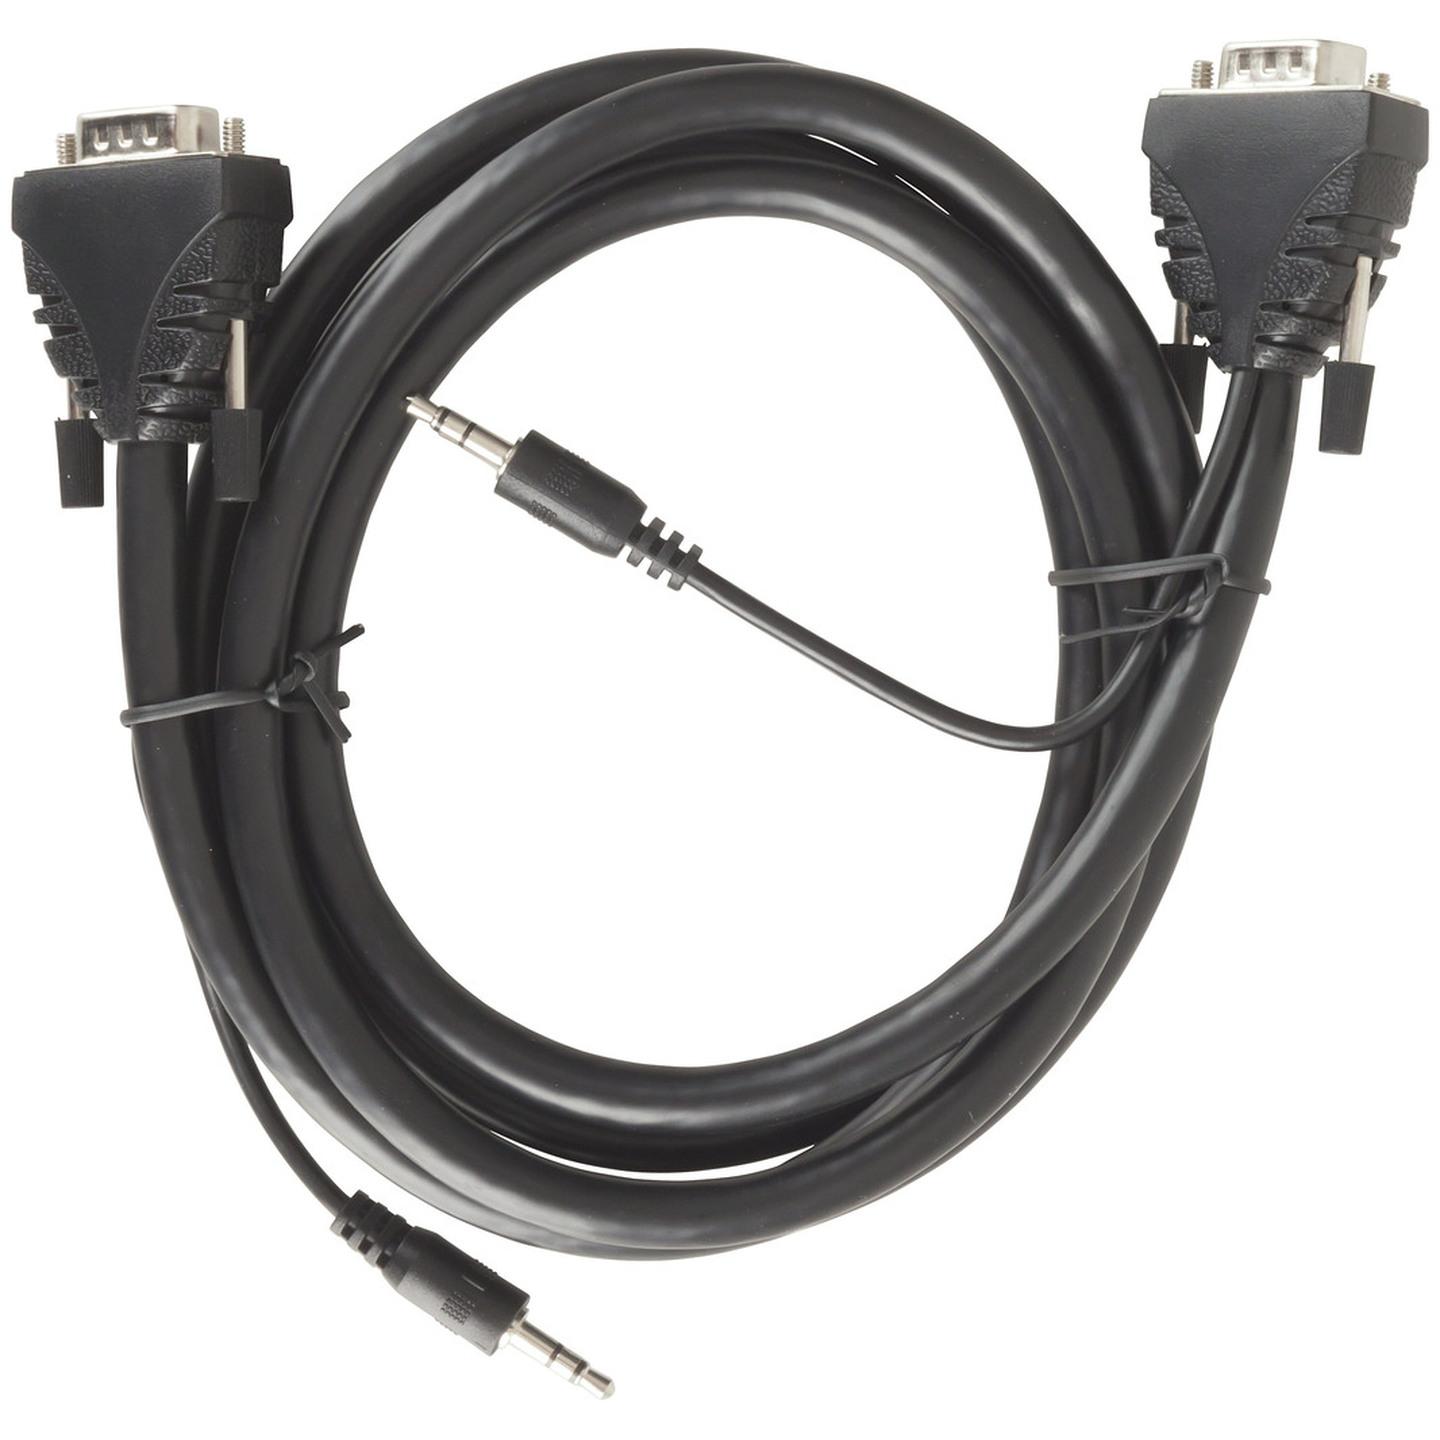 VGA Monitor Cable with 3.5mm Audio 1.8m